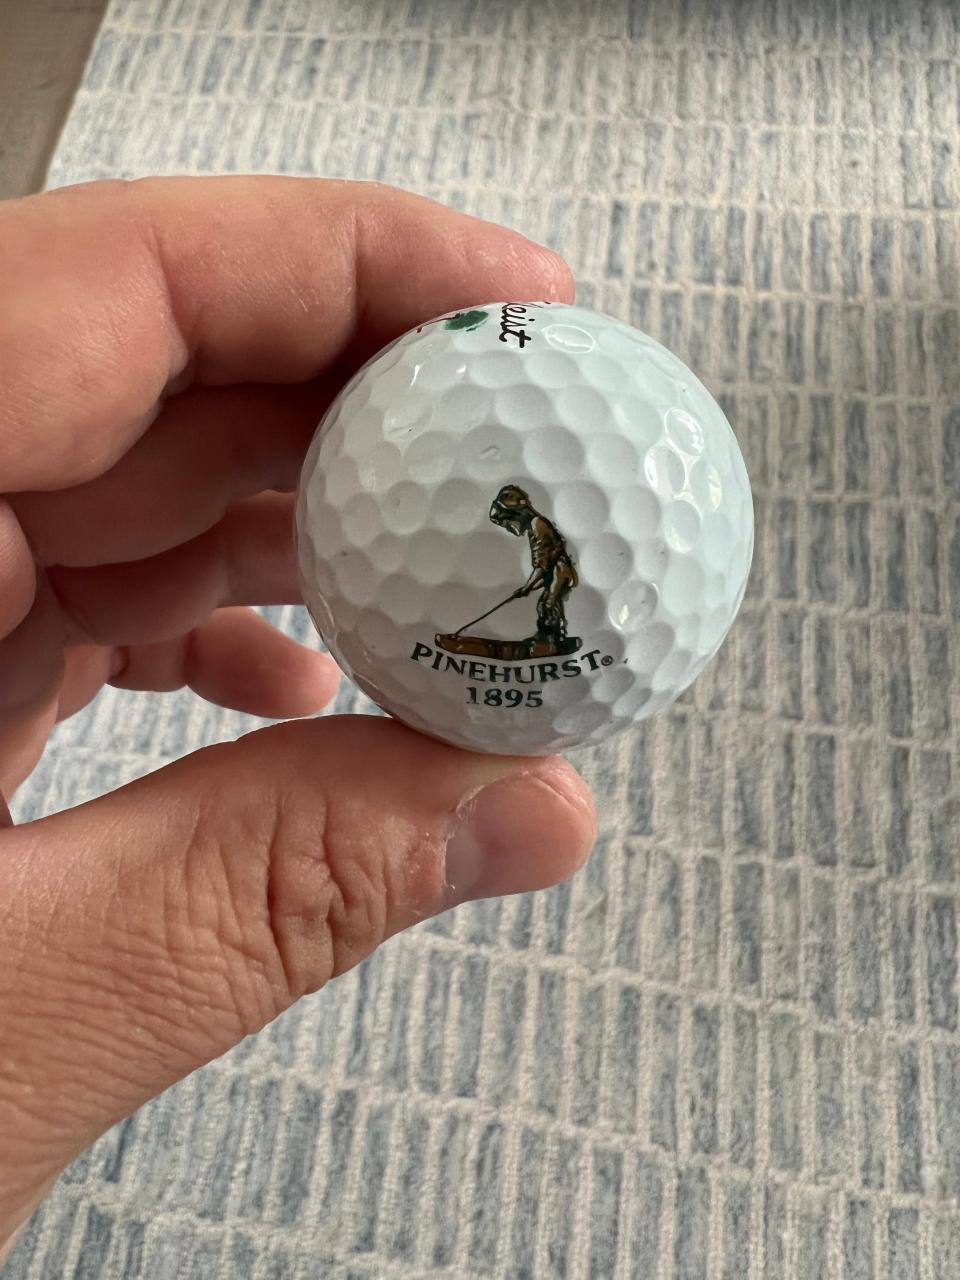 Billye Hollister made his hole-in-one on the 19th hole at Payne's Valley Golf Course at Big Cedar Lodge with a Pinehurst golf ball. Hollister is from Arlington, Virginia and was at Big Cedar Lodge for five-days with a group of seven friends.